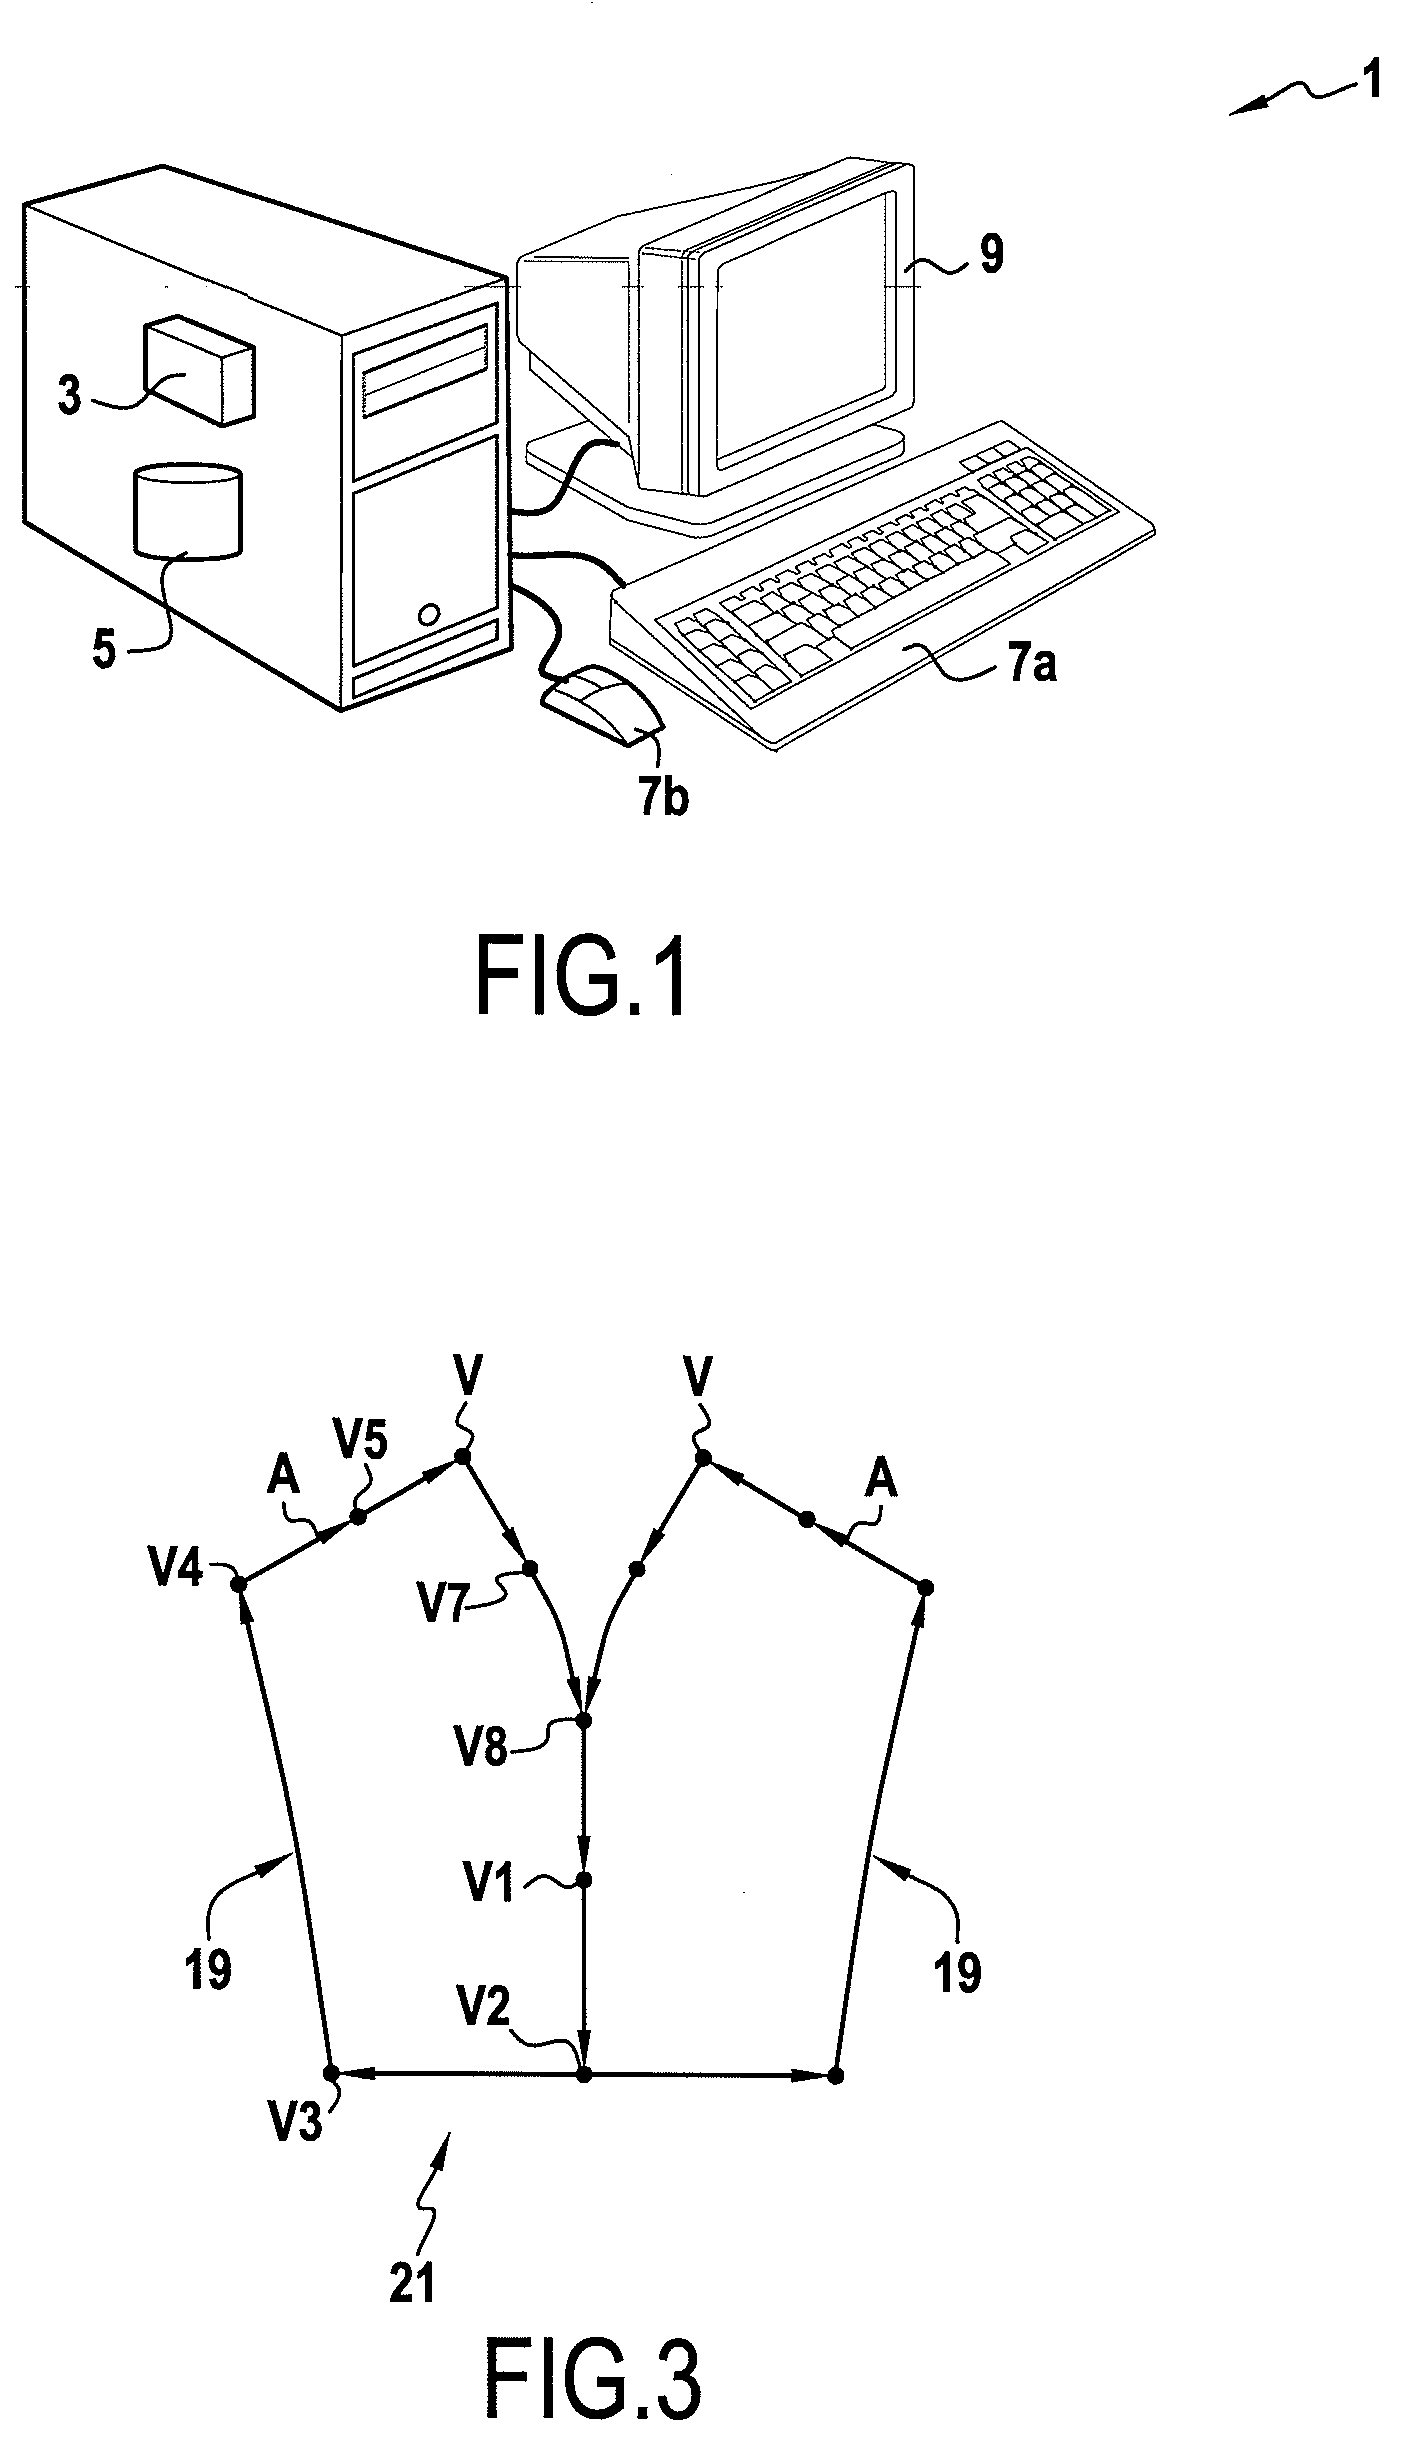 Device and Method for Designing a Garment